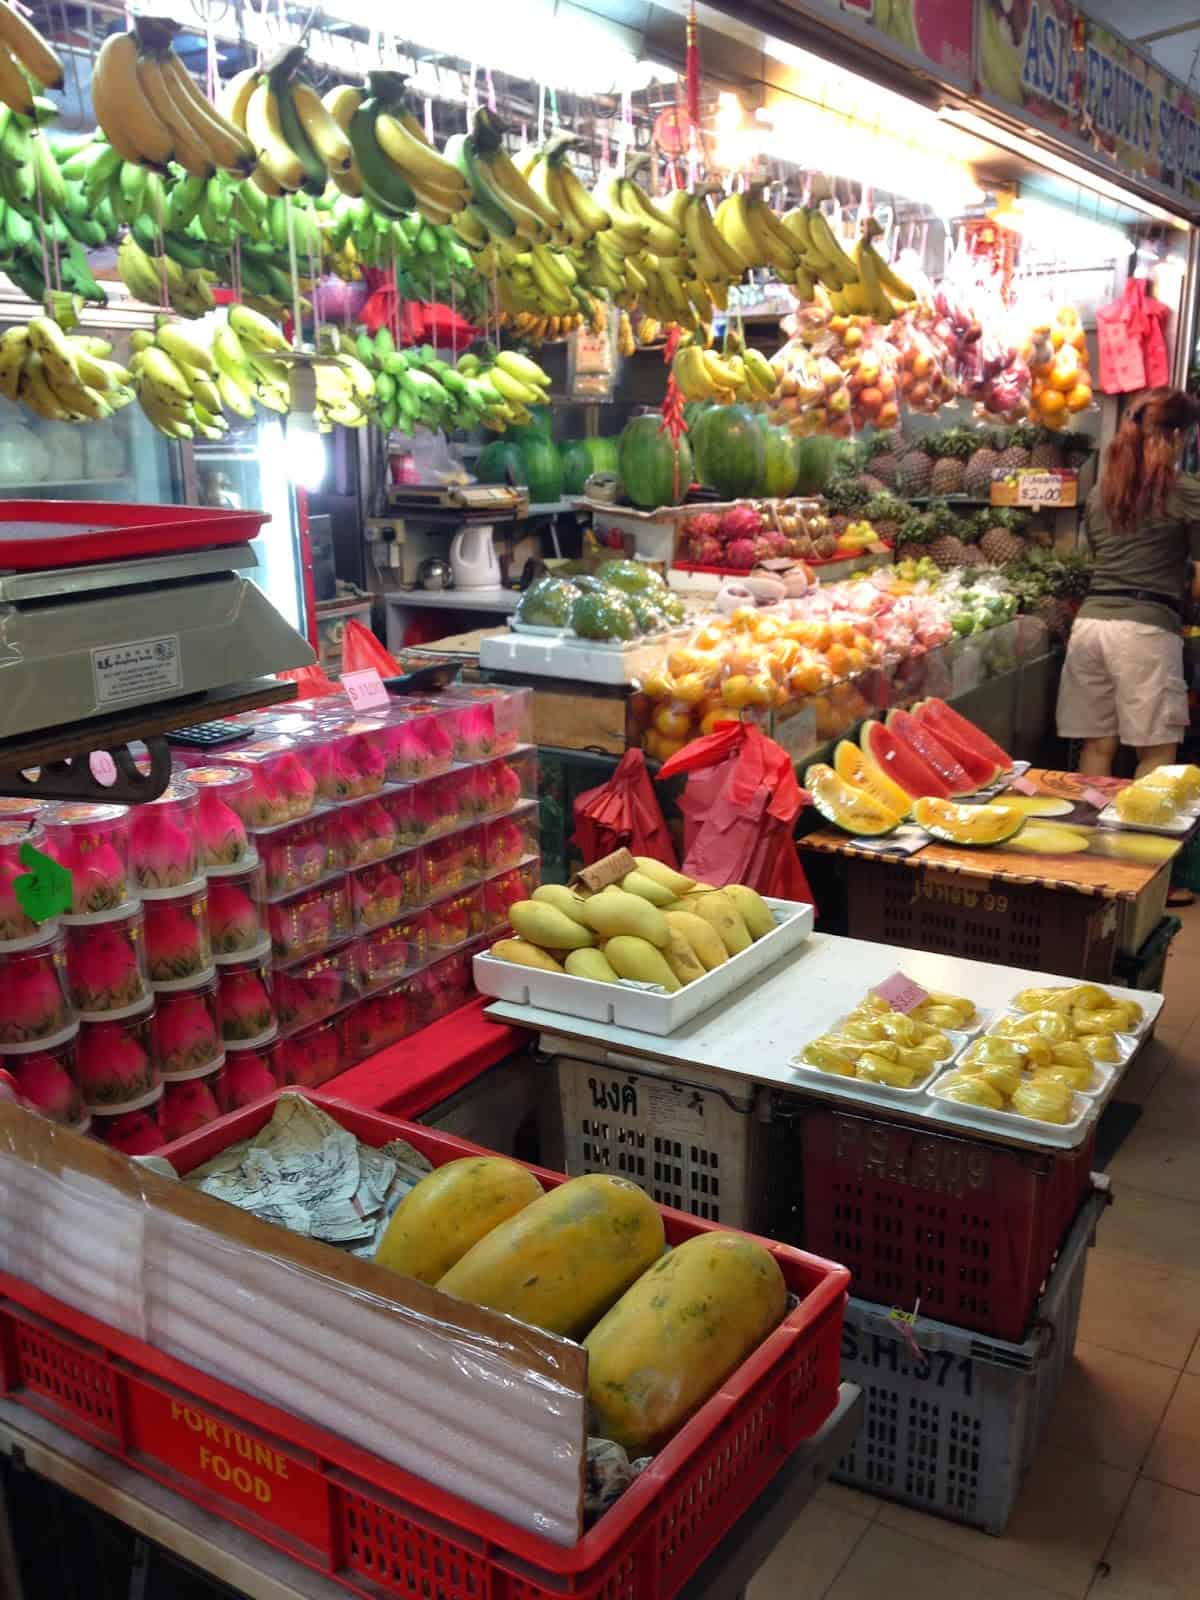 Fruit stall in the market